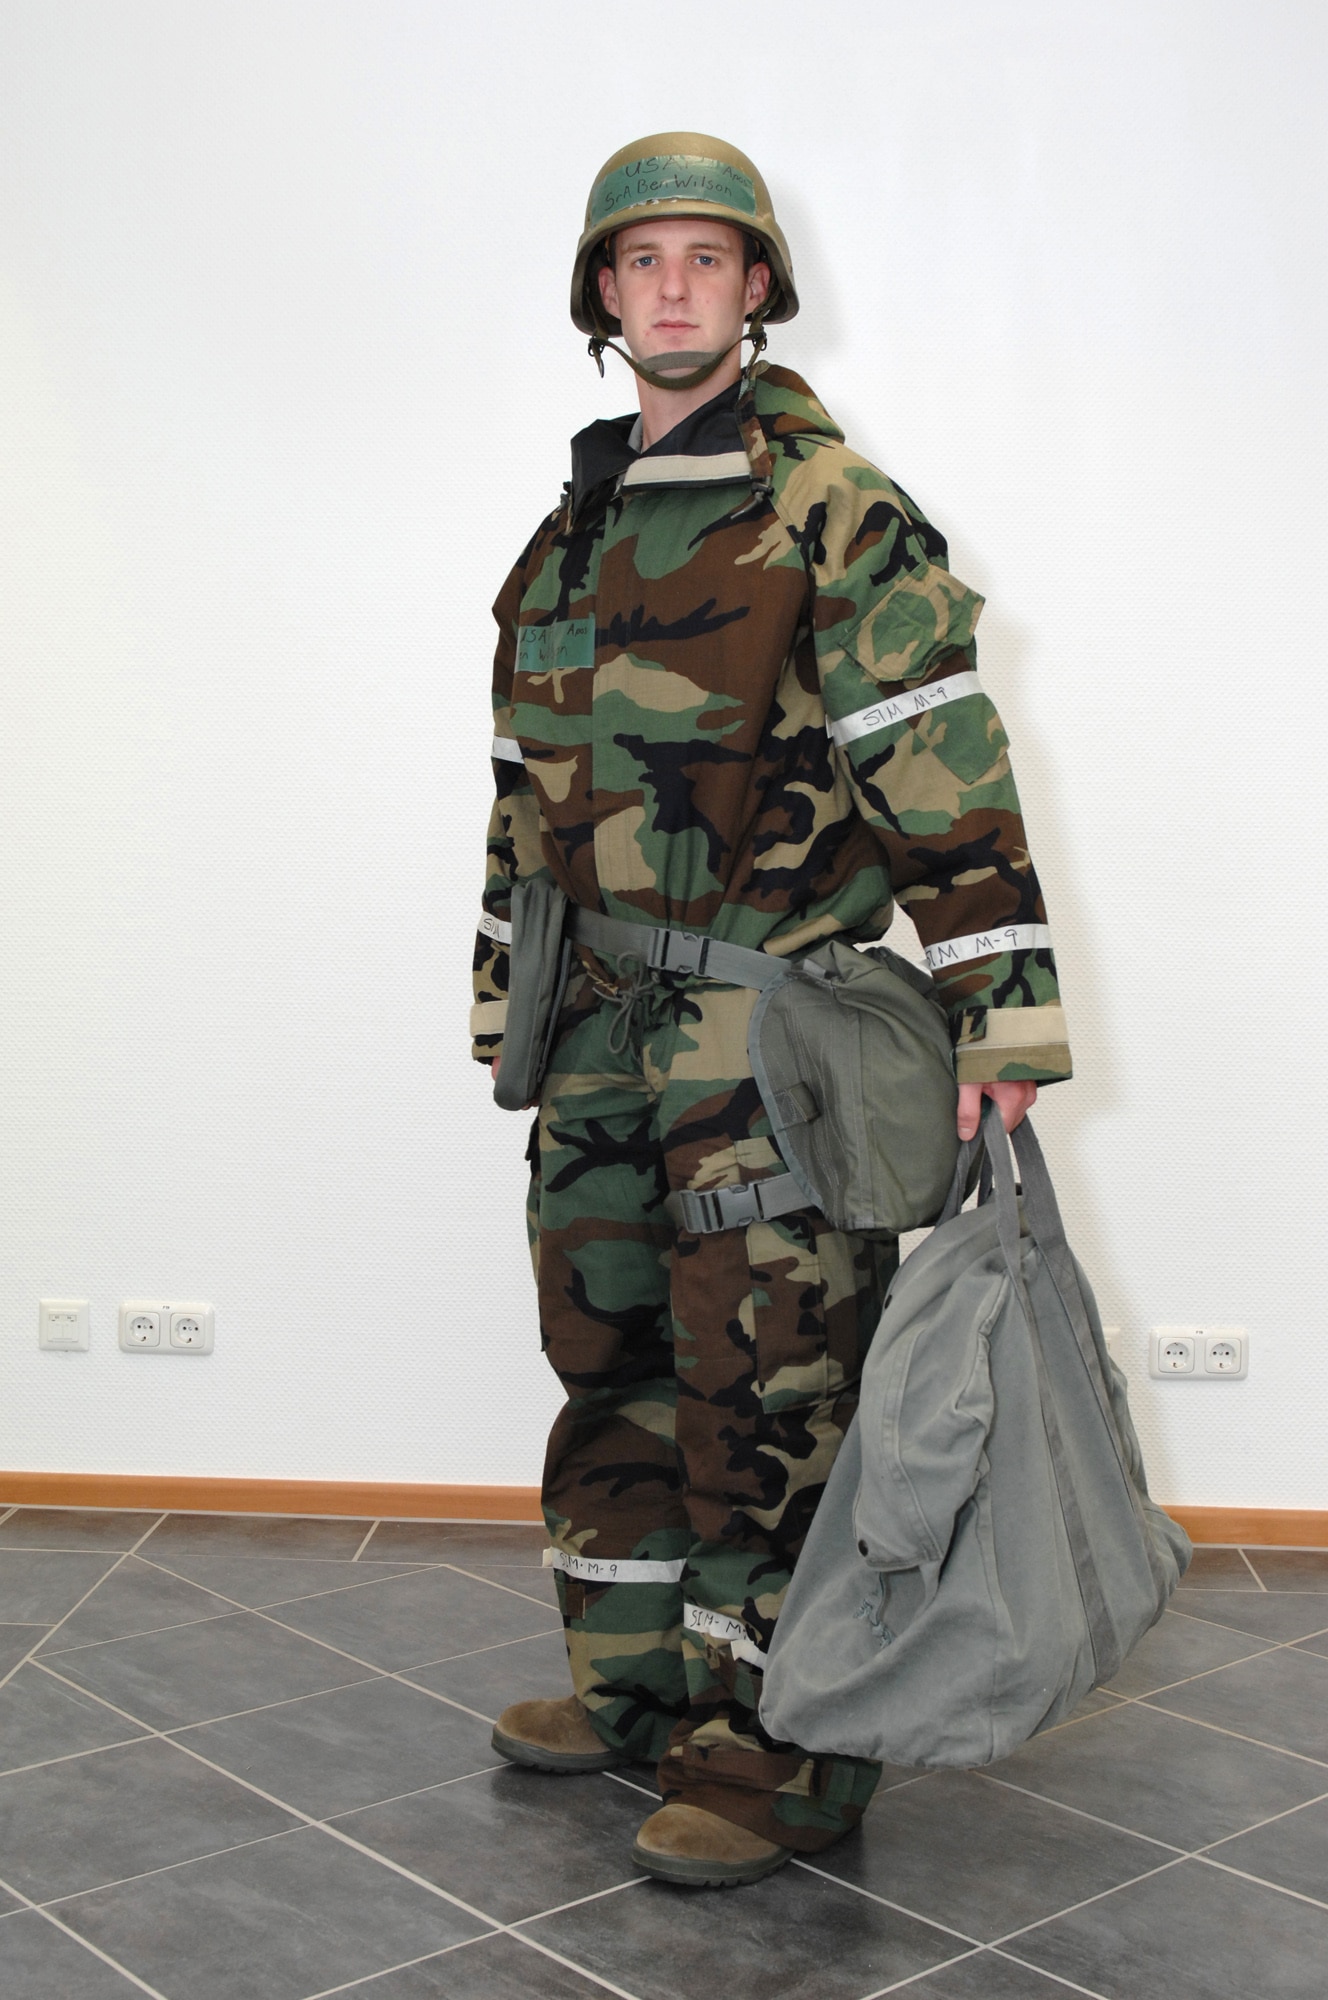 SPANGDAHLEM AIR BASE, Germany -- Senior Airman Benjamin Wilson, 52nd Fighter Wing Public Affairs Office, dresses in Mission Oriented Protective Posture 1.  People need to wear their overgarment and field gear and carry their overboots, protective mask and gloves in MOPP 1.  Aircrew will wear their overgarment and field gear and carry their overboots, protective mask, glove and overcape. (U.S. Air Force photo by Master Sgt. Bill Gomez)